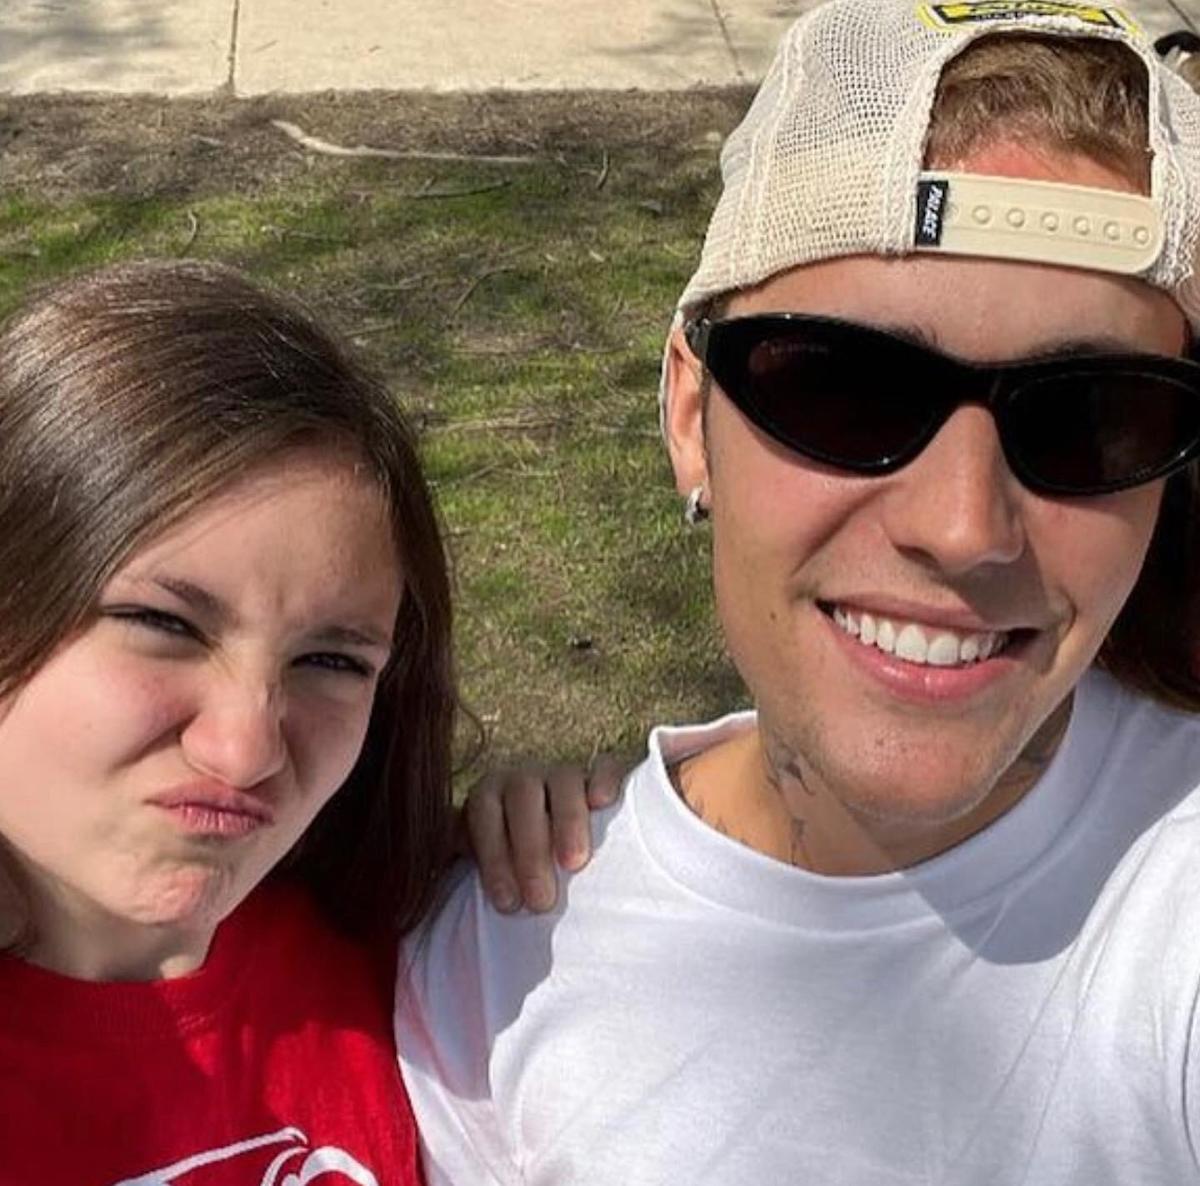 Justin Bieber Pens Sweet Tribute to His ‘Precious’ Little Sister Jazmyn on Her 14th Birthday